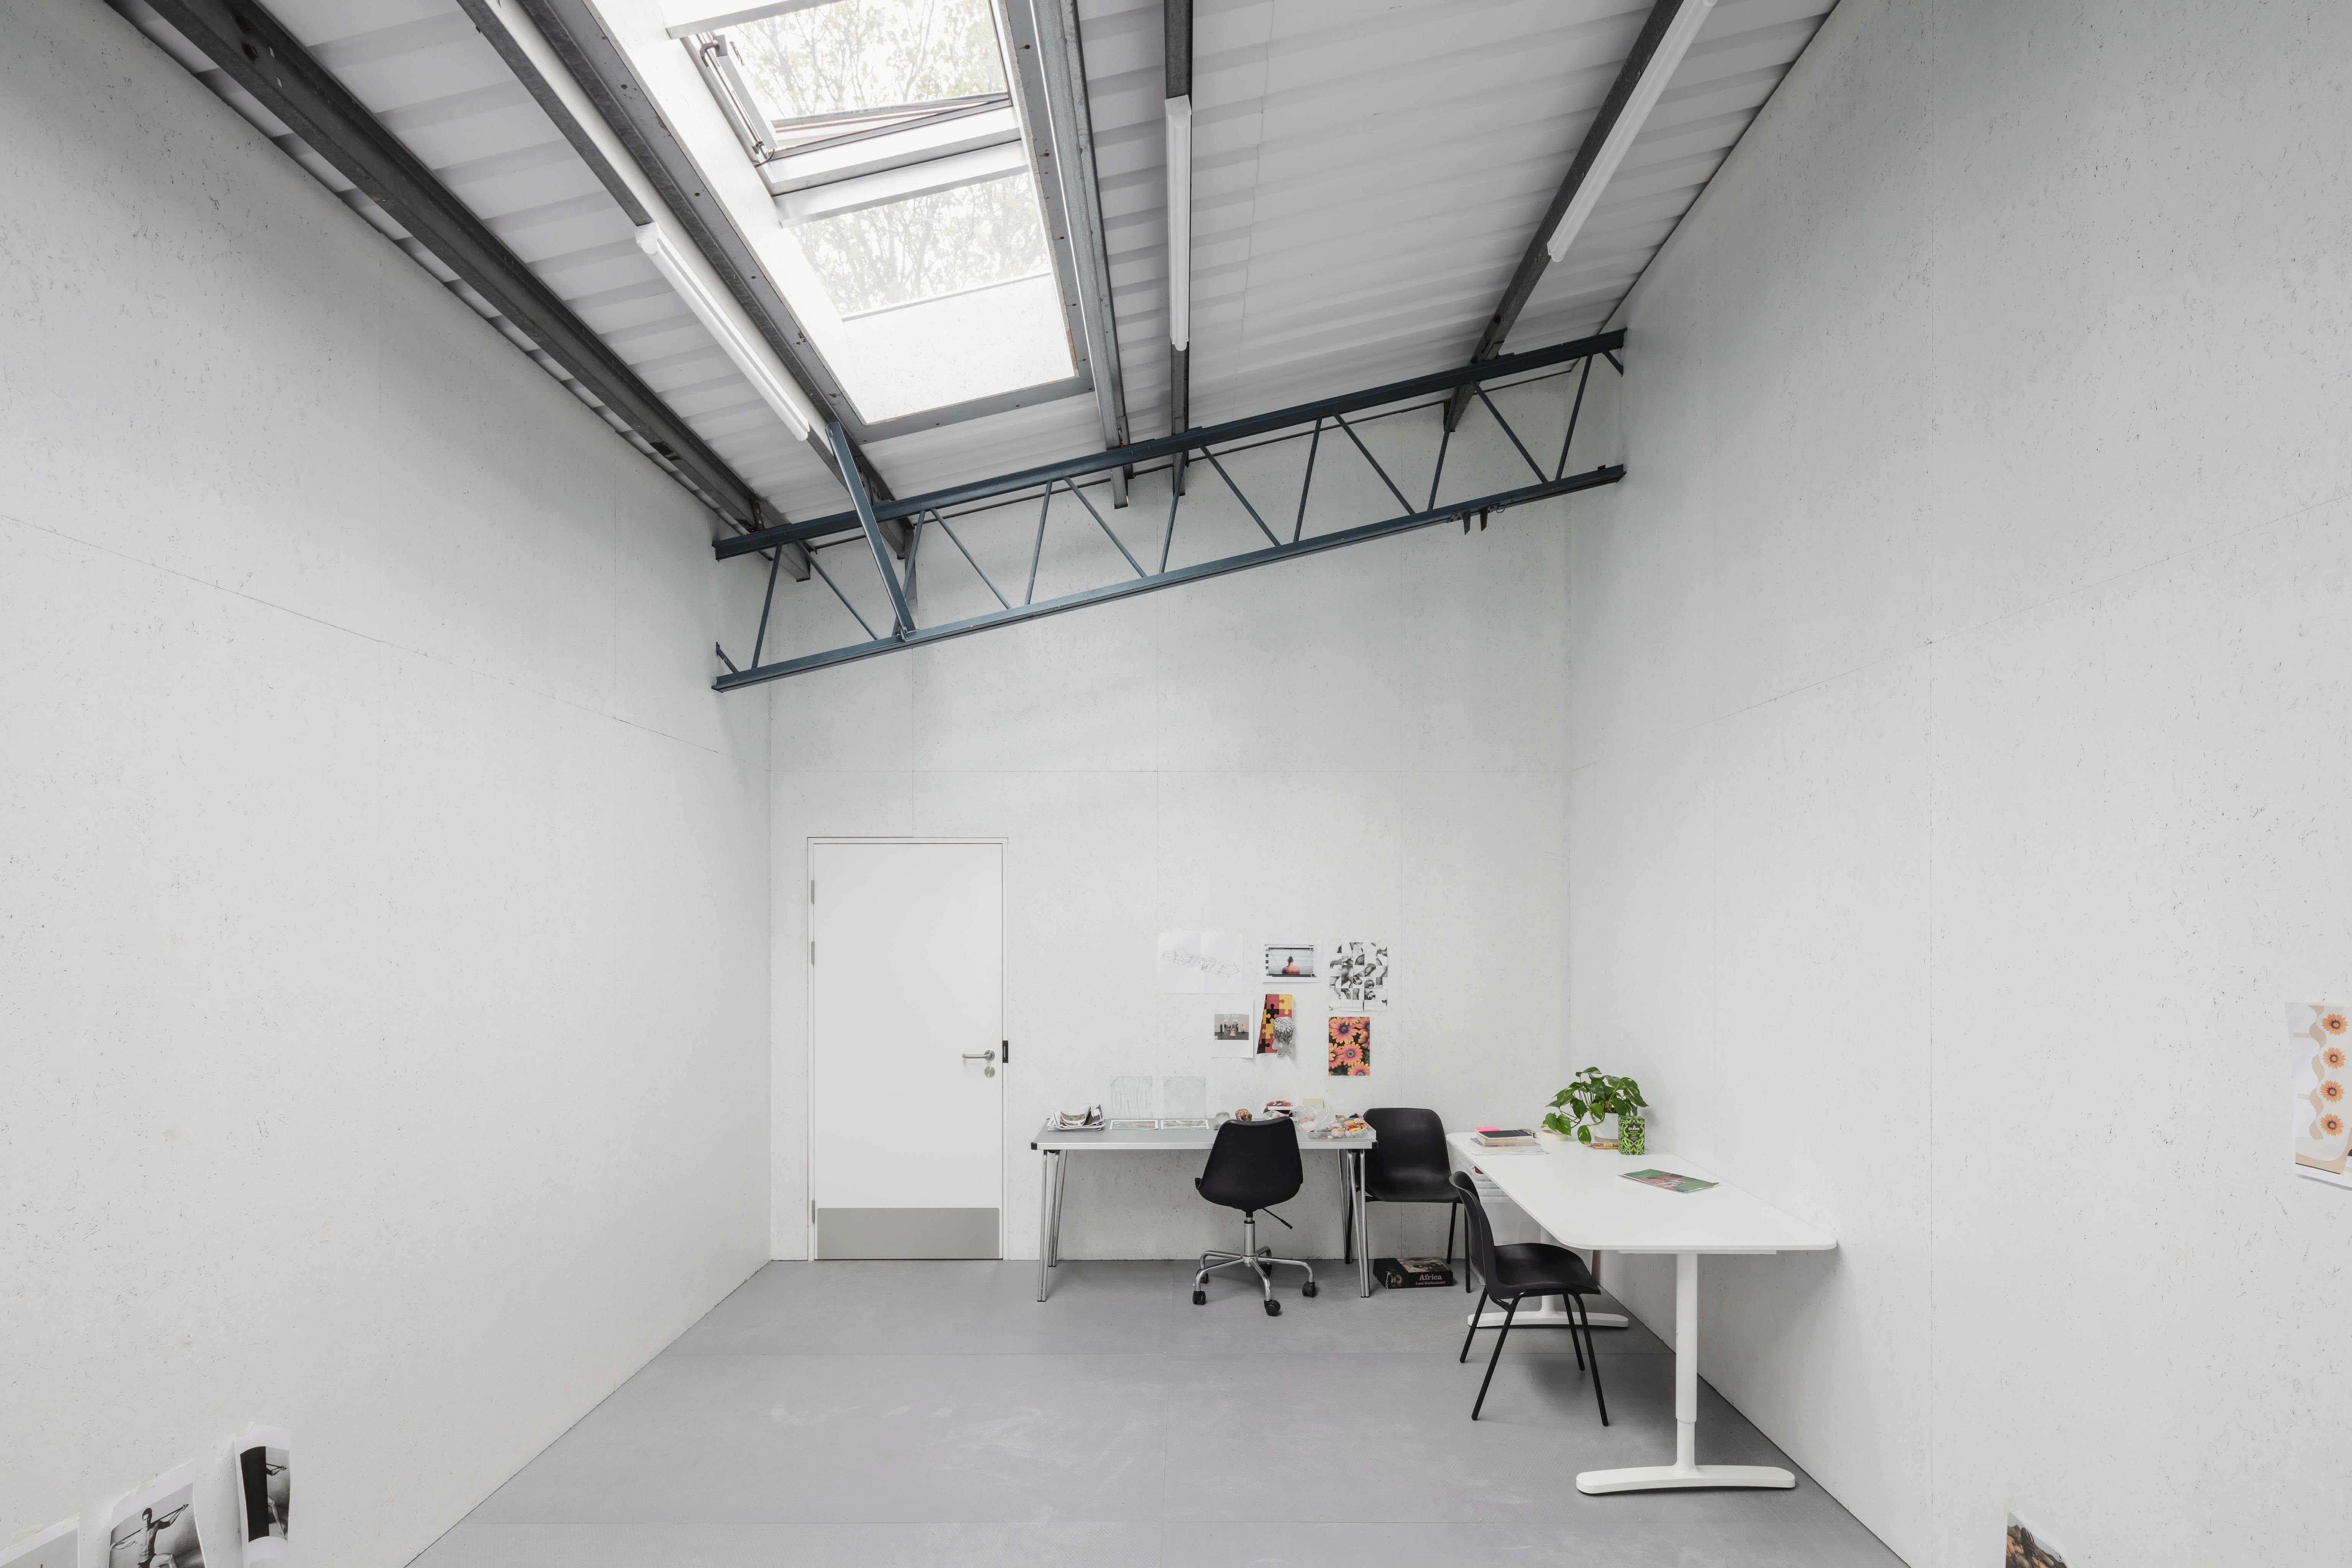 an artist's studio with white walls, slanted roof and exposed steal beams. The roof has a skylight window.